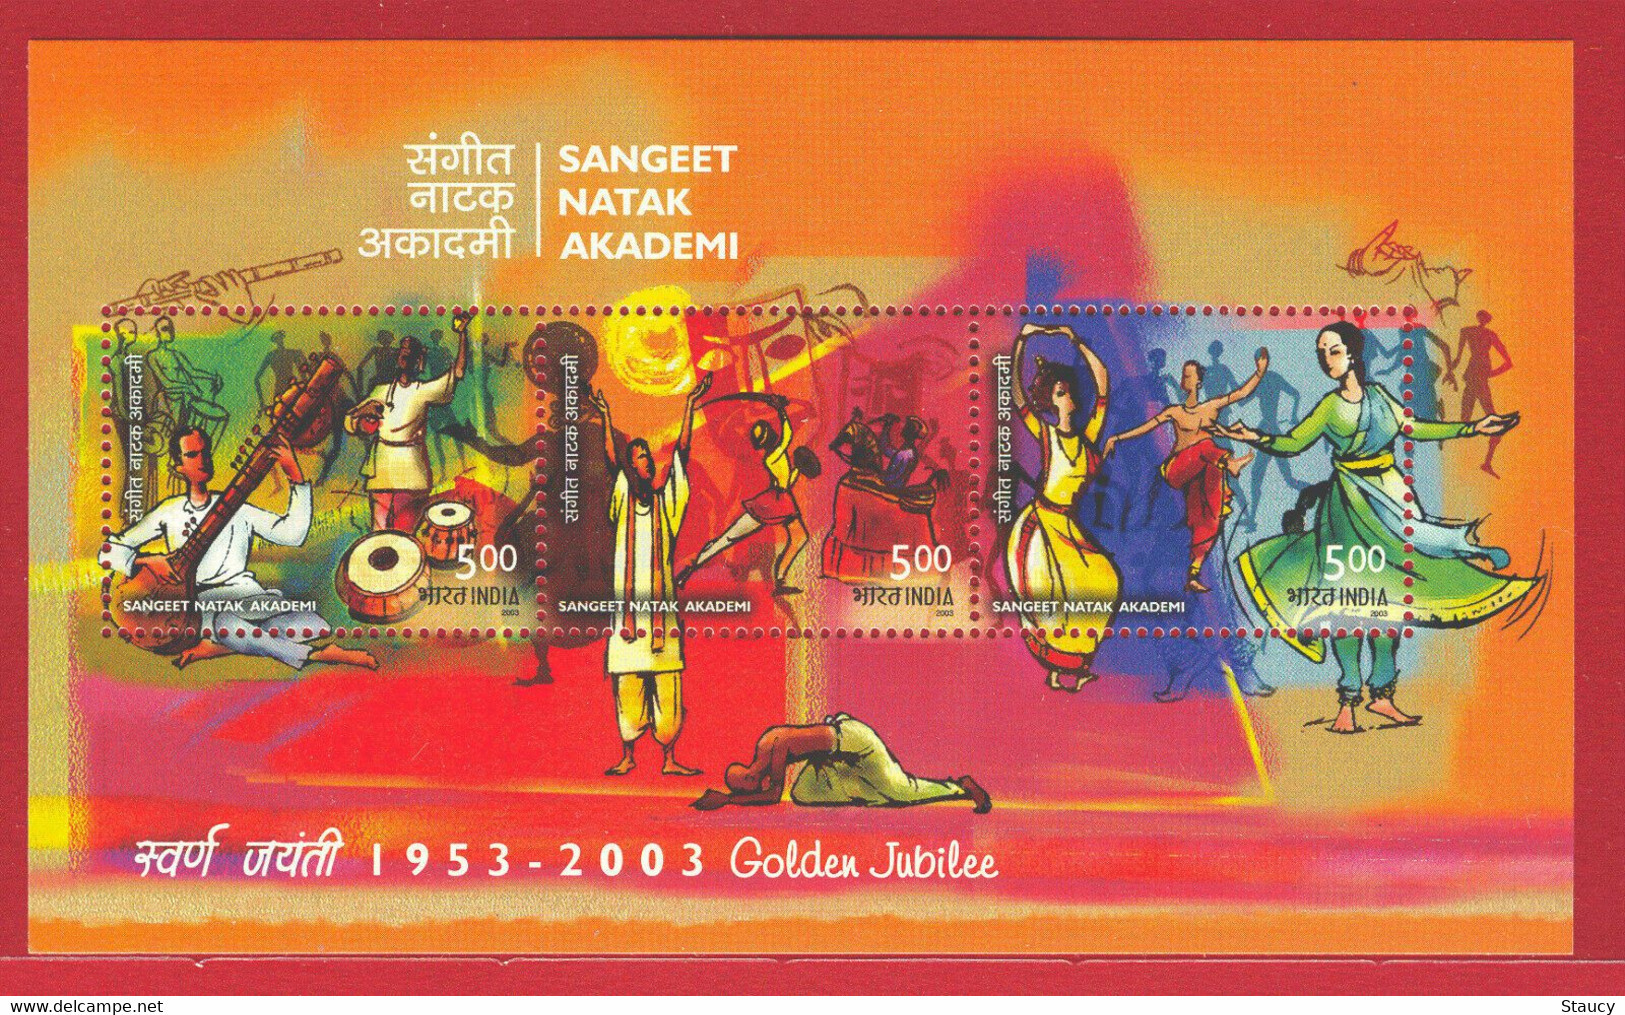 India 2003 Complete/ Full set of 9 different Mini/ Miniature sheets Year Pack Aero India Chennai Museum MS MNH as scan